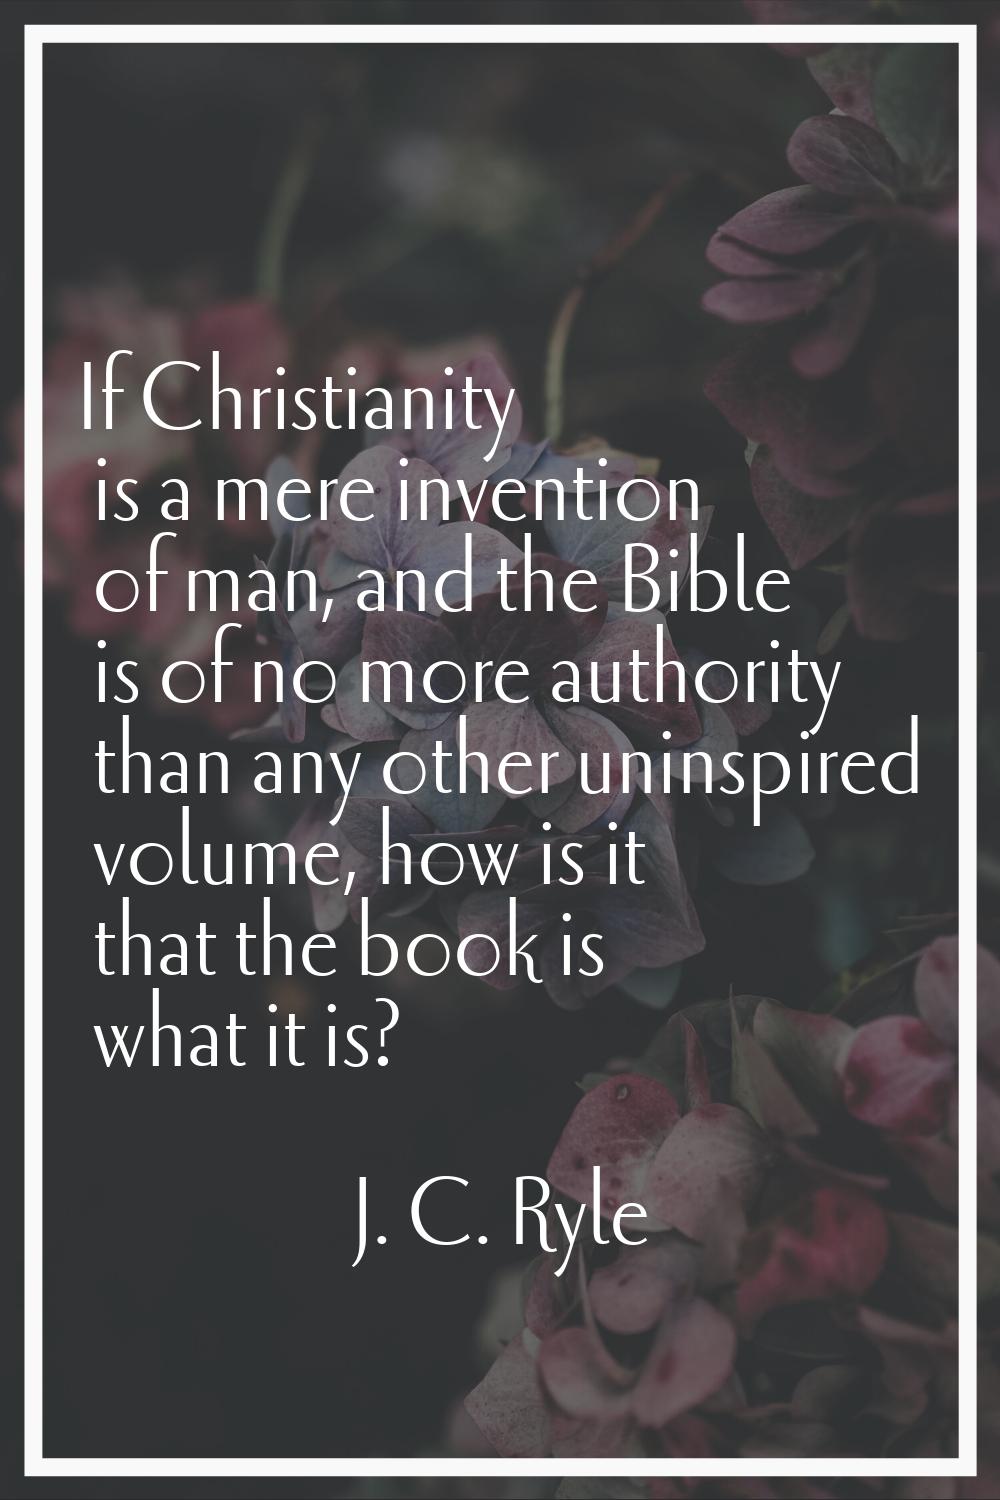 If Christianity is a mere invention of man, and the Bible is of no more authority than any other un